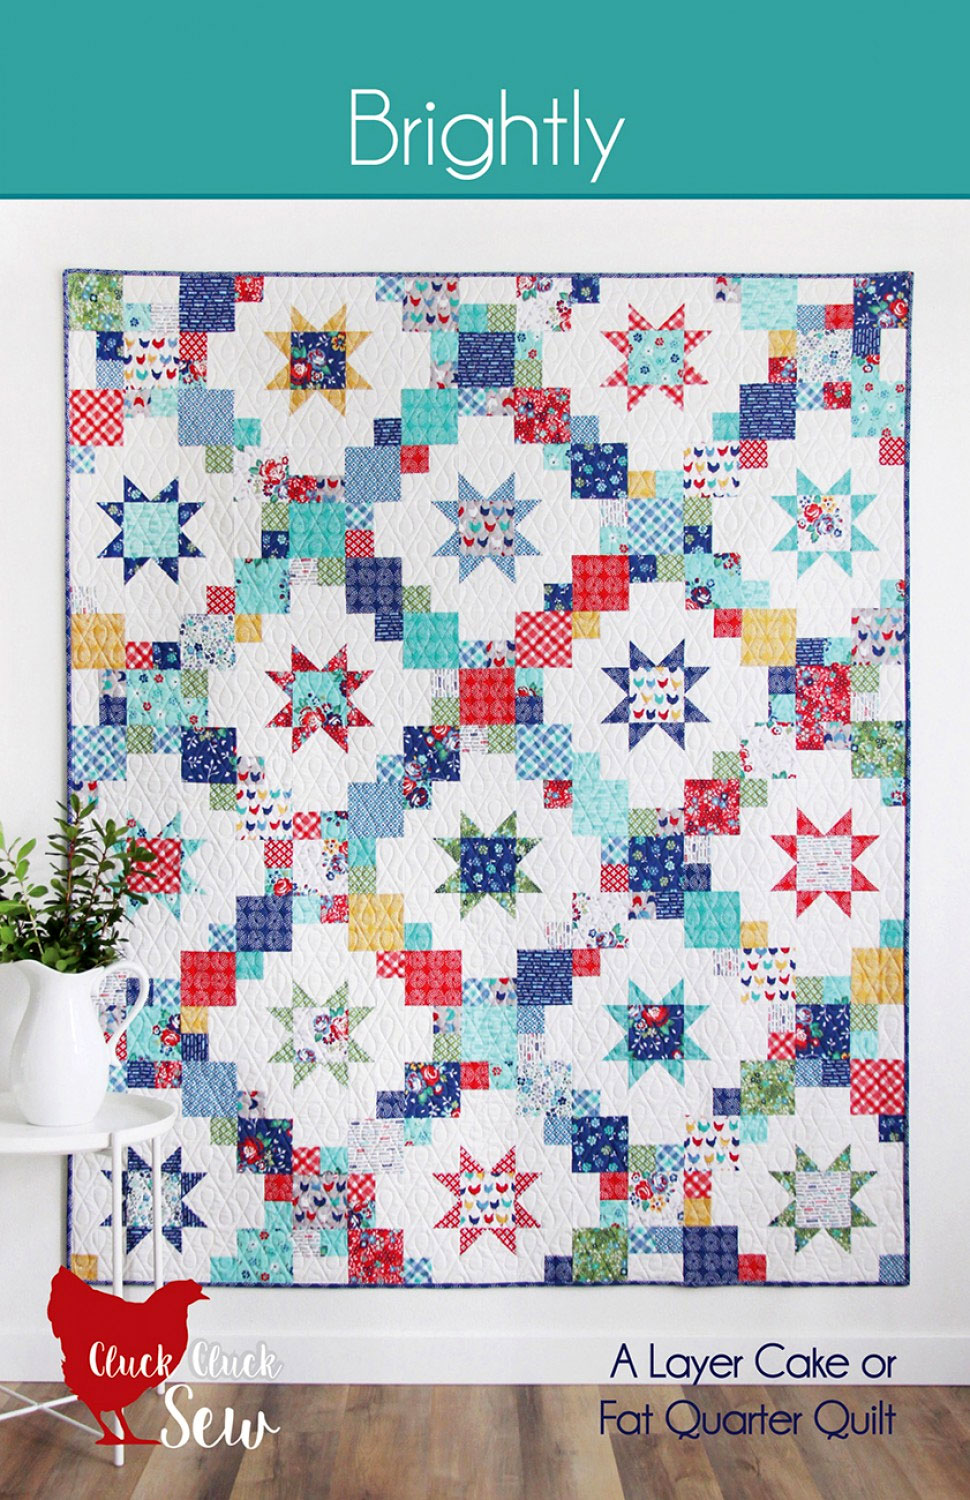 Brightly-quilt-sewing-pattern-Cluck-Cluck-Sew-front